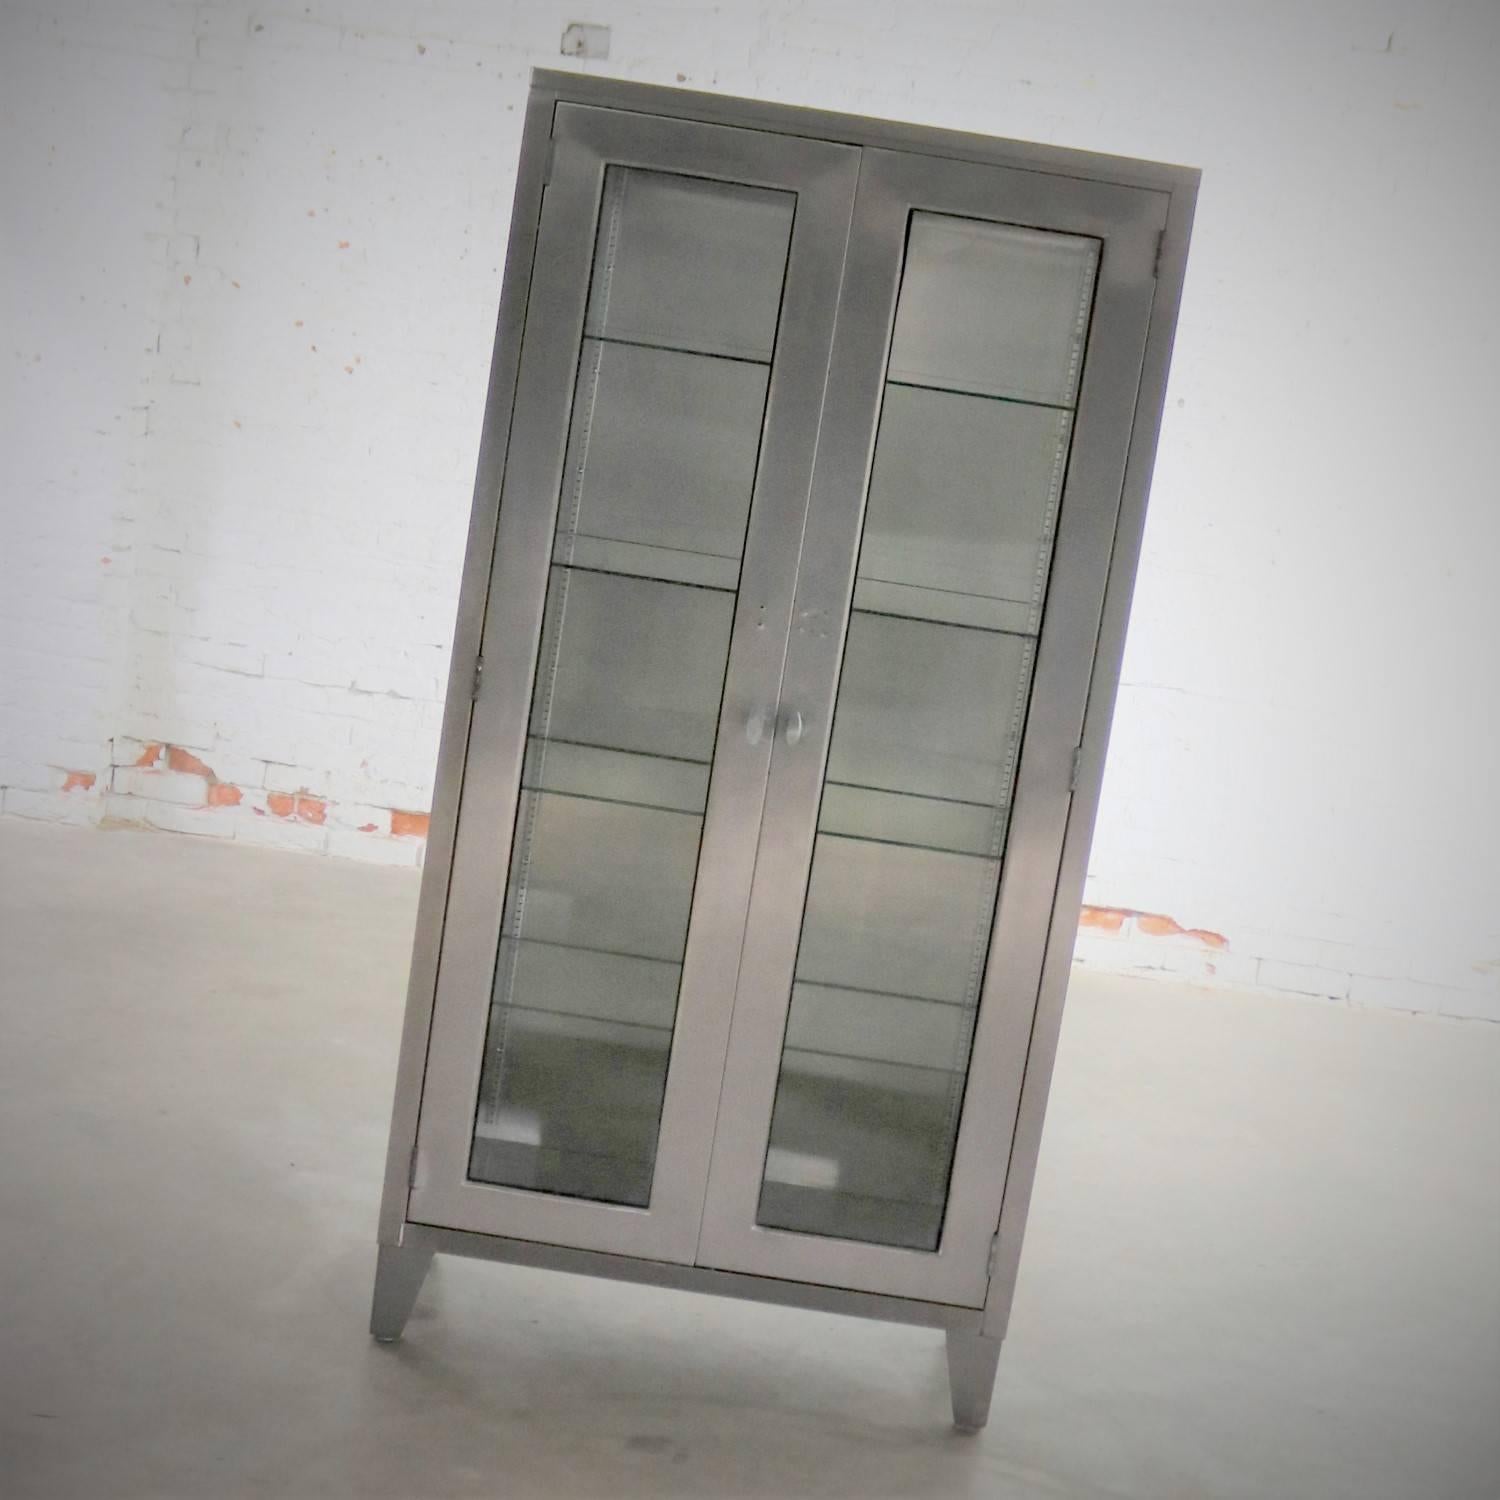 Vintage Stainless Steel Industrial Display Apothecary Medical Cabinet Glass Door 9